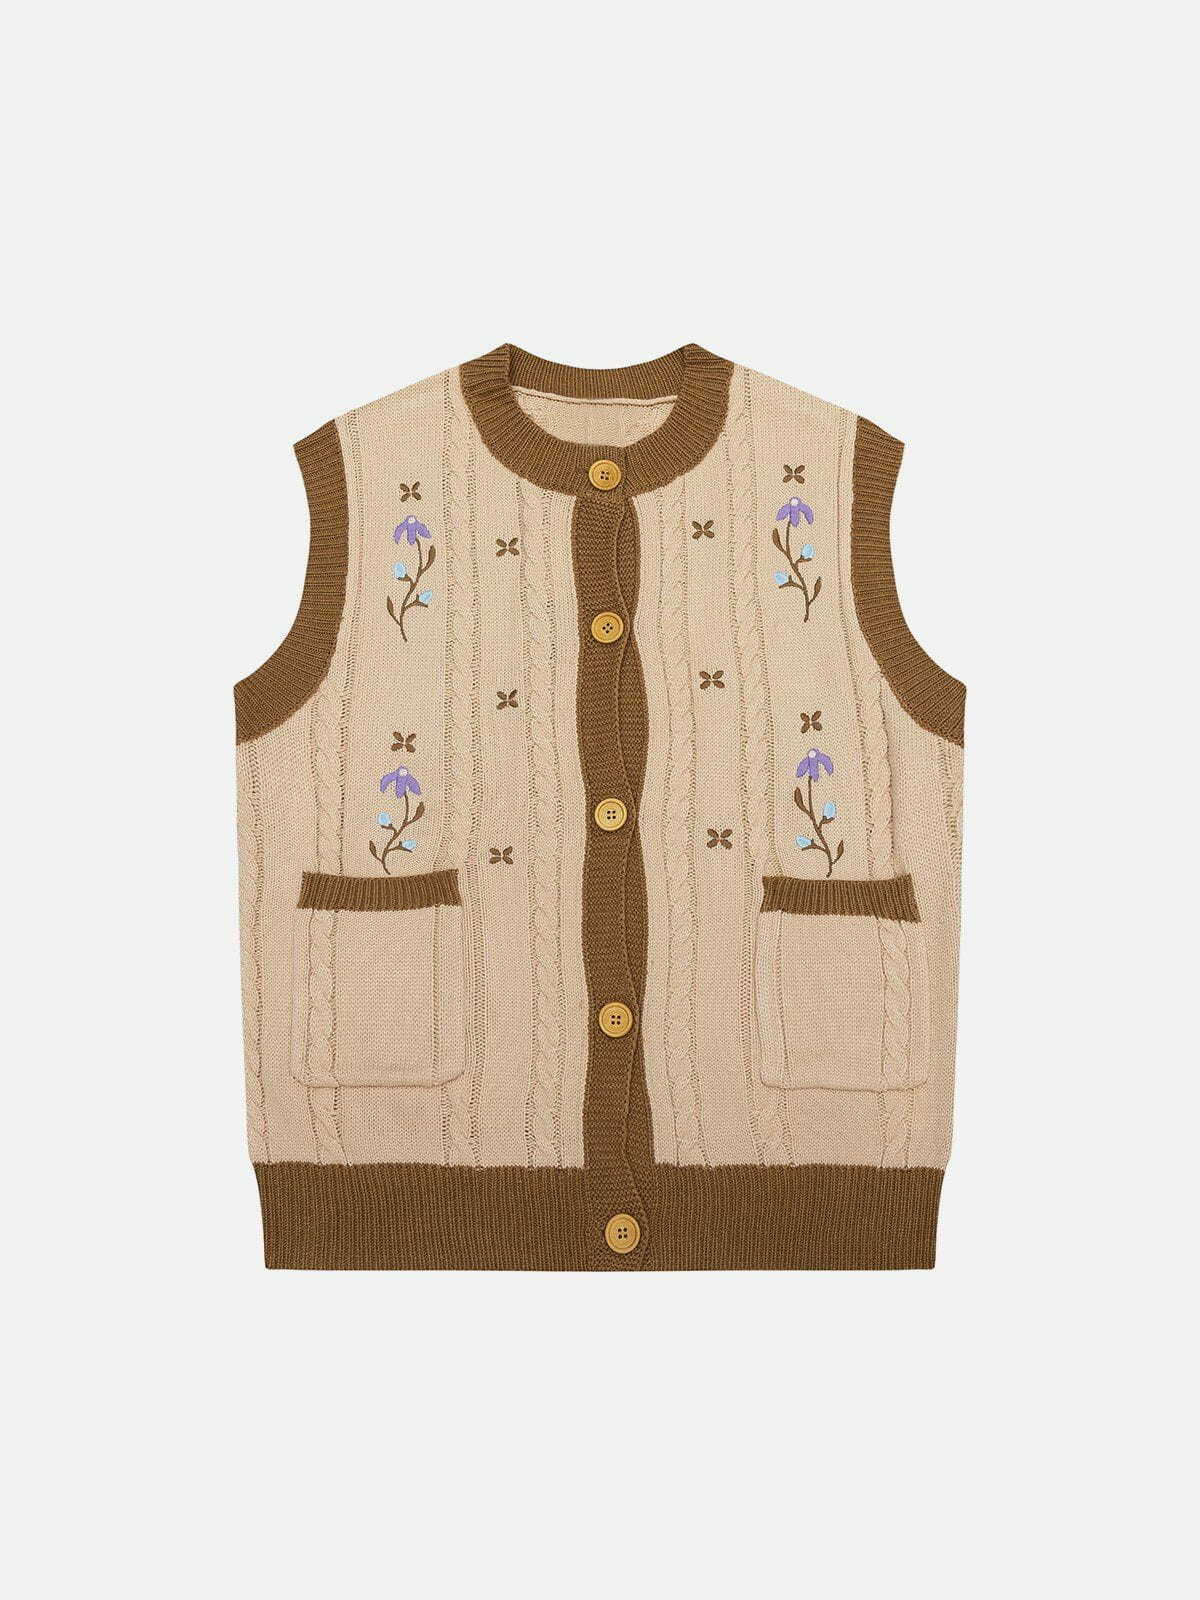 vintage embroidery sweater vest quirky embellished y2k fashion 1439